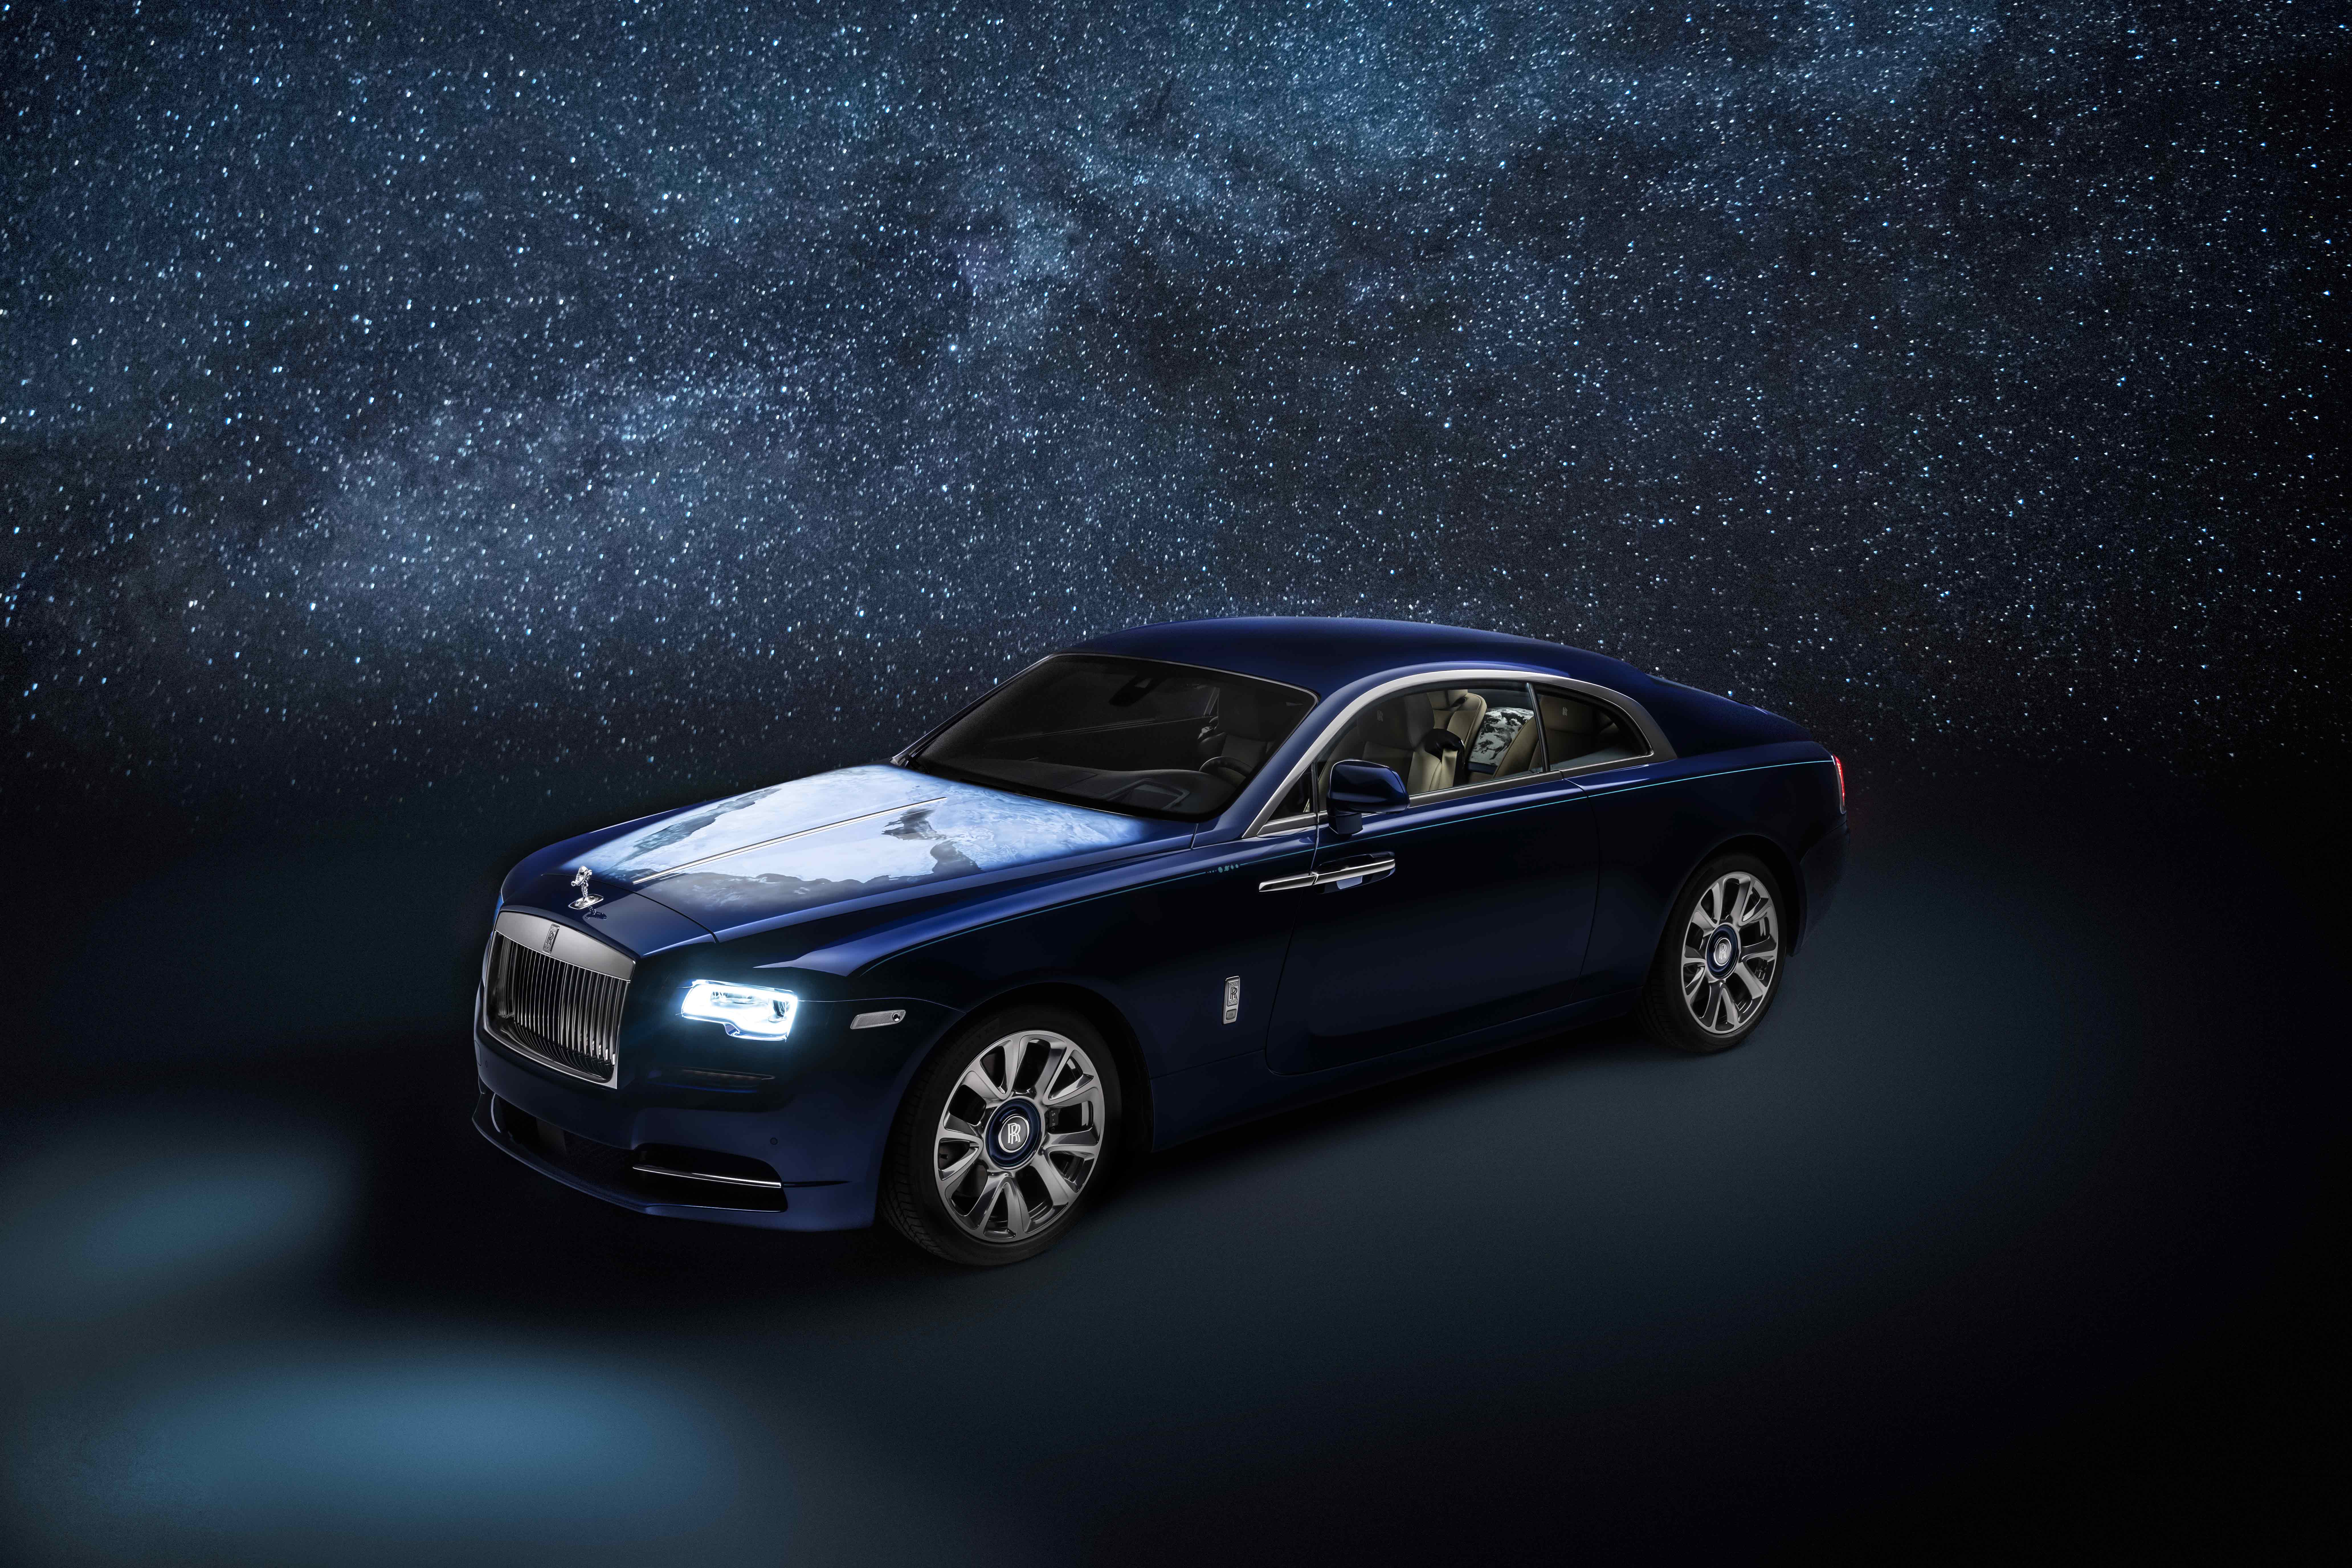 Bespoke ‘Wraith - Inspired By Earth’  Touches Down In Abu Dhabi